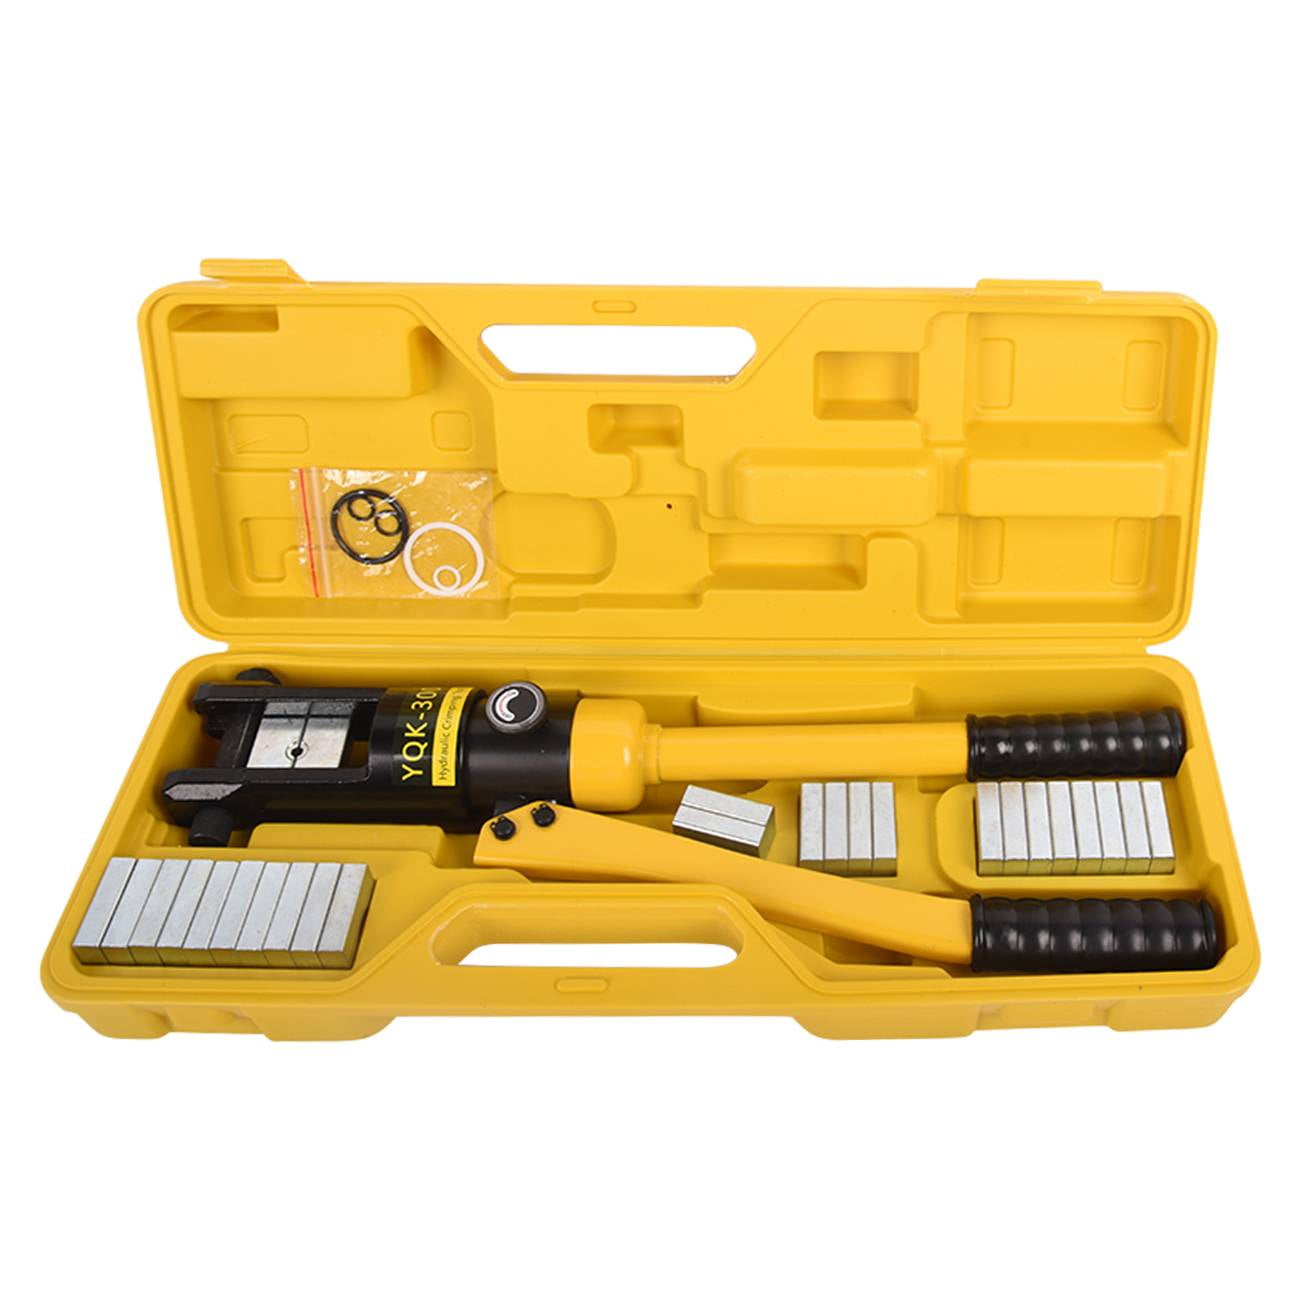 Dawot 16T Hydraulic Crimping Tools Electrical Terminal Crimper 9 AWG to ...